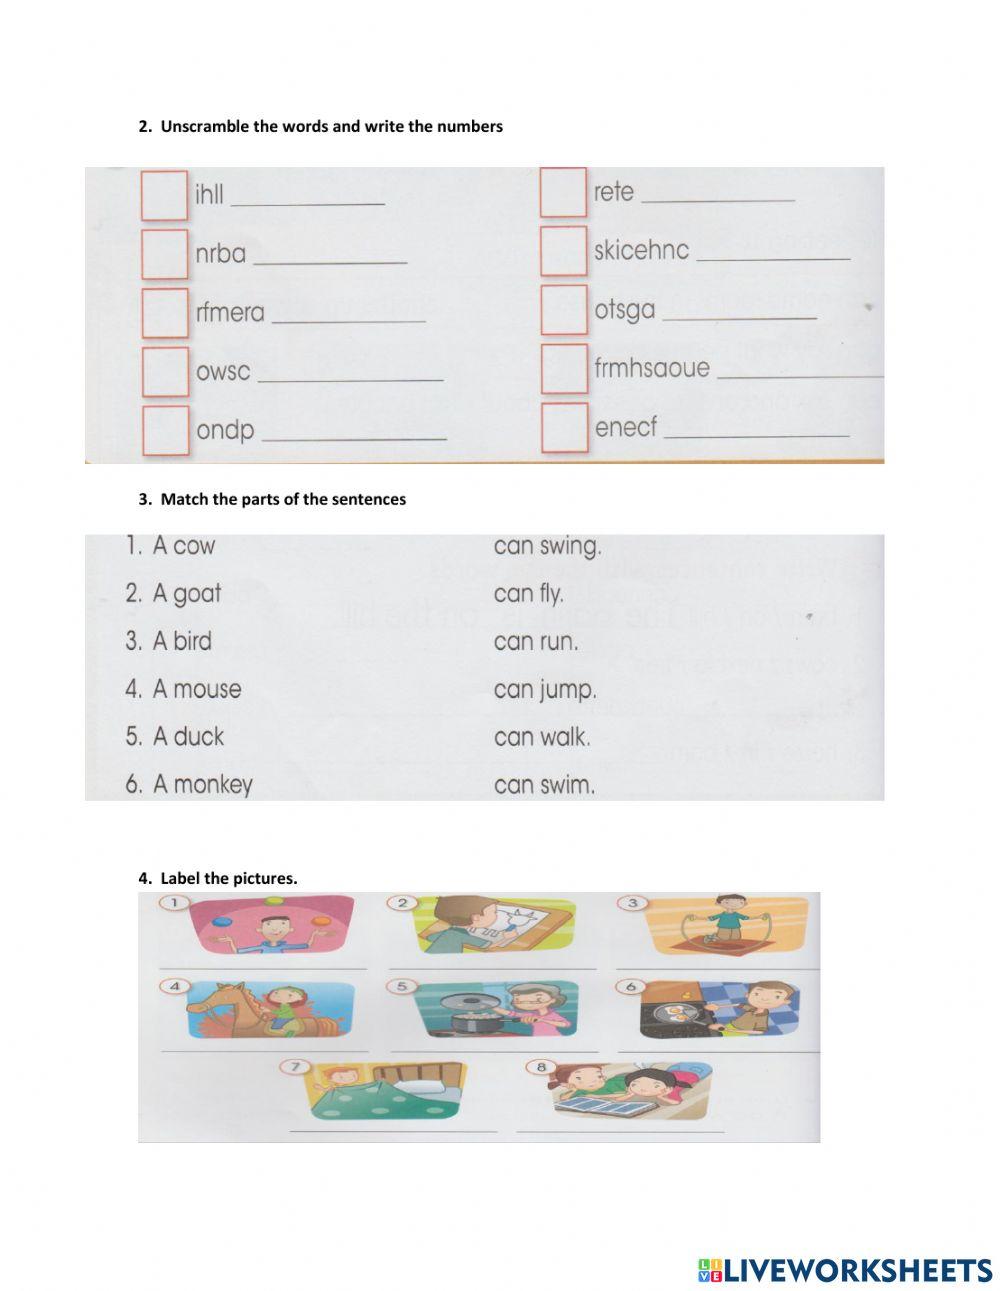 INGLÉS-Test review 2nd grade. Agosto